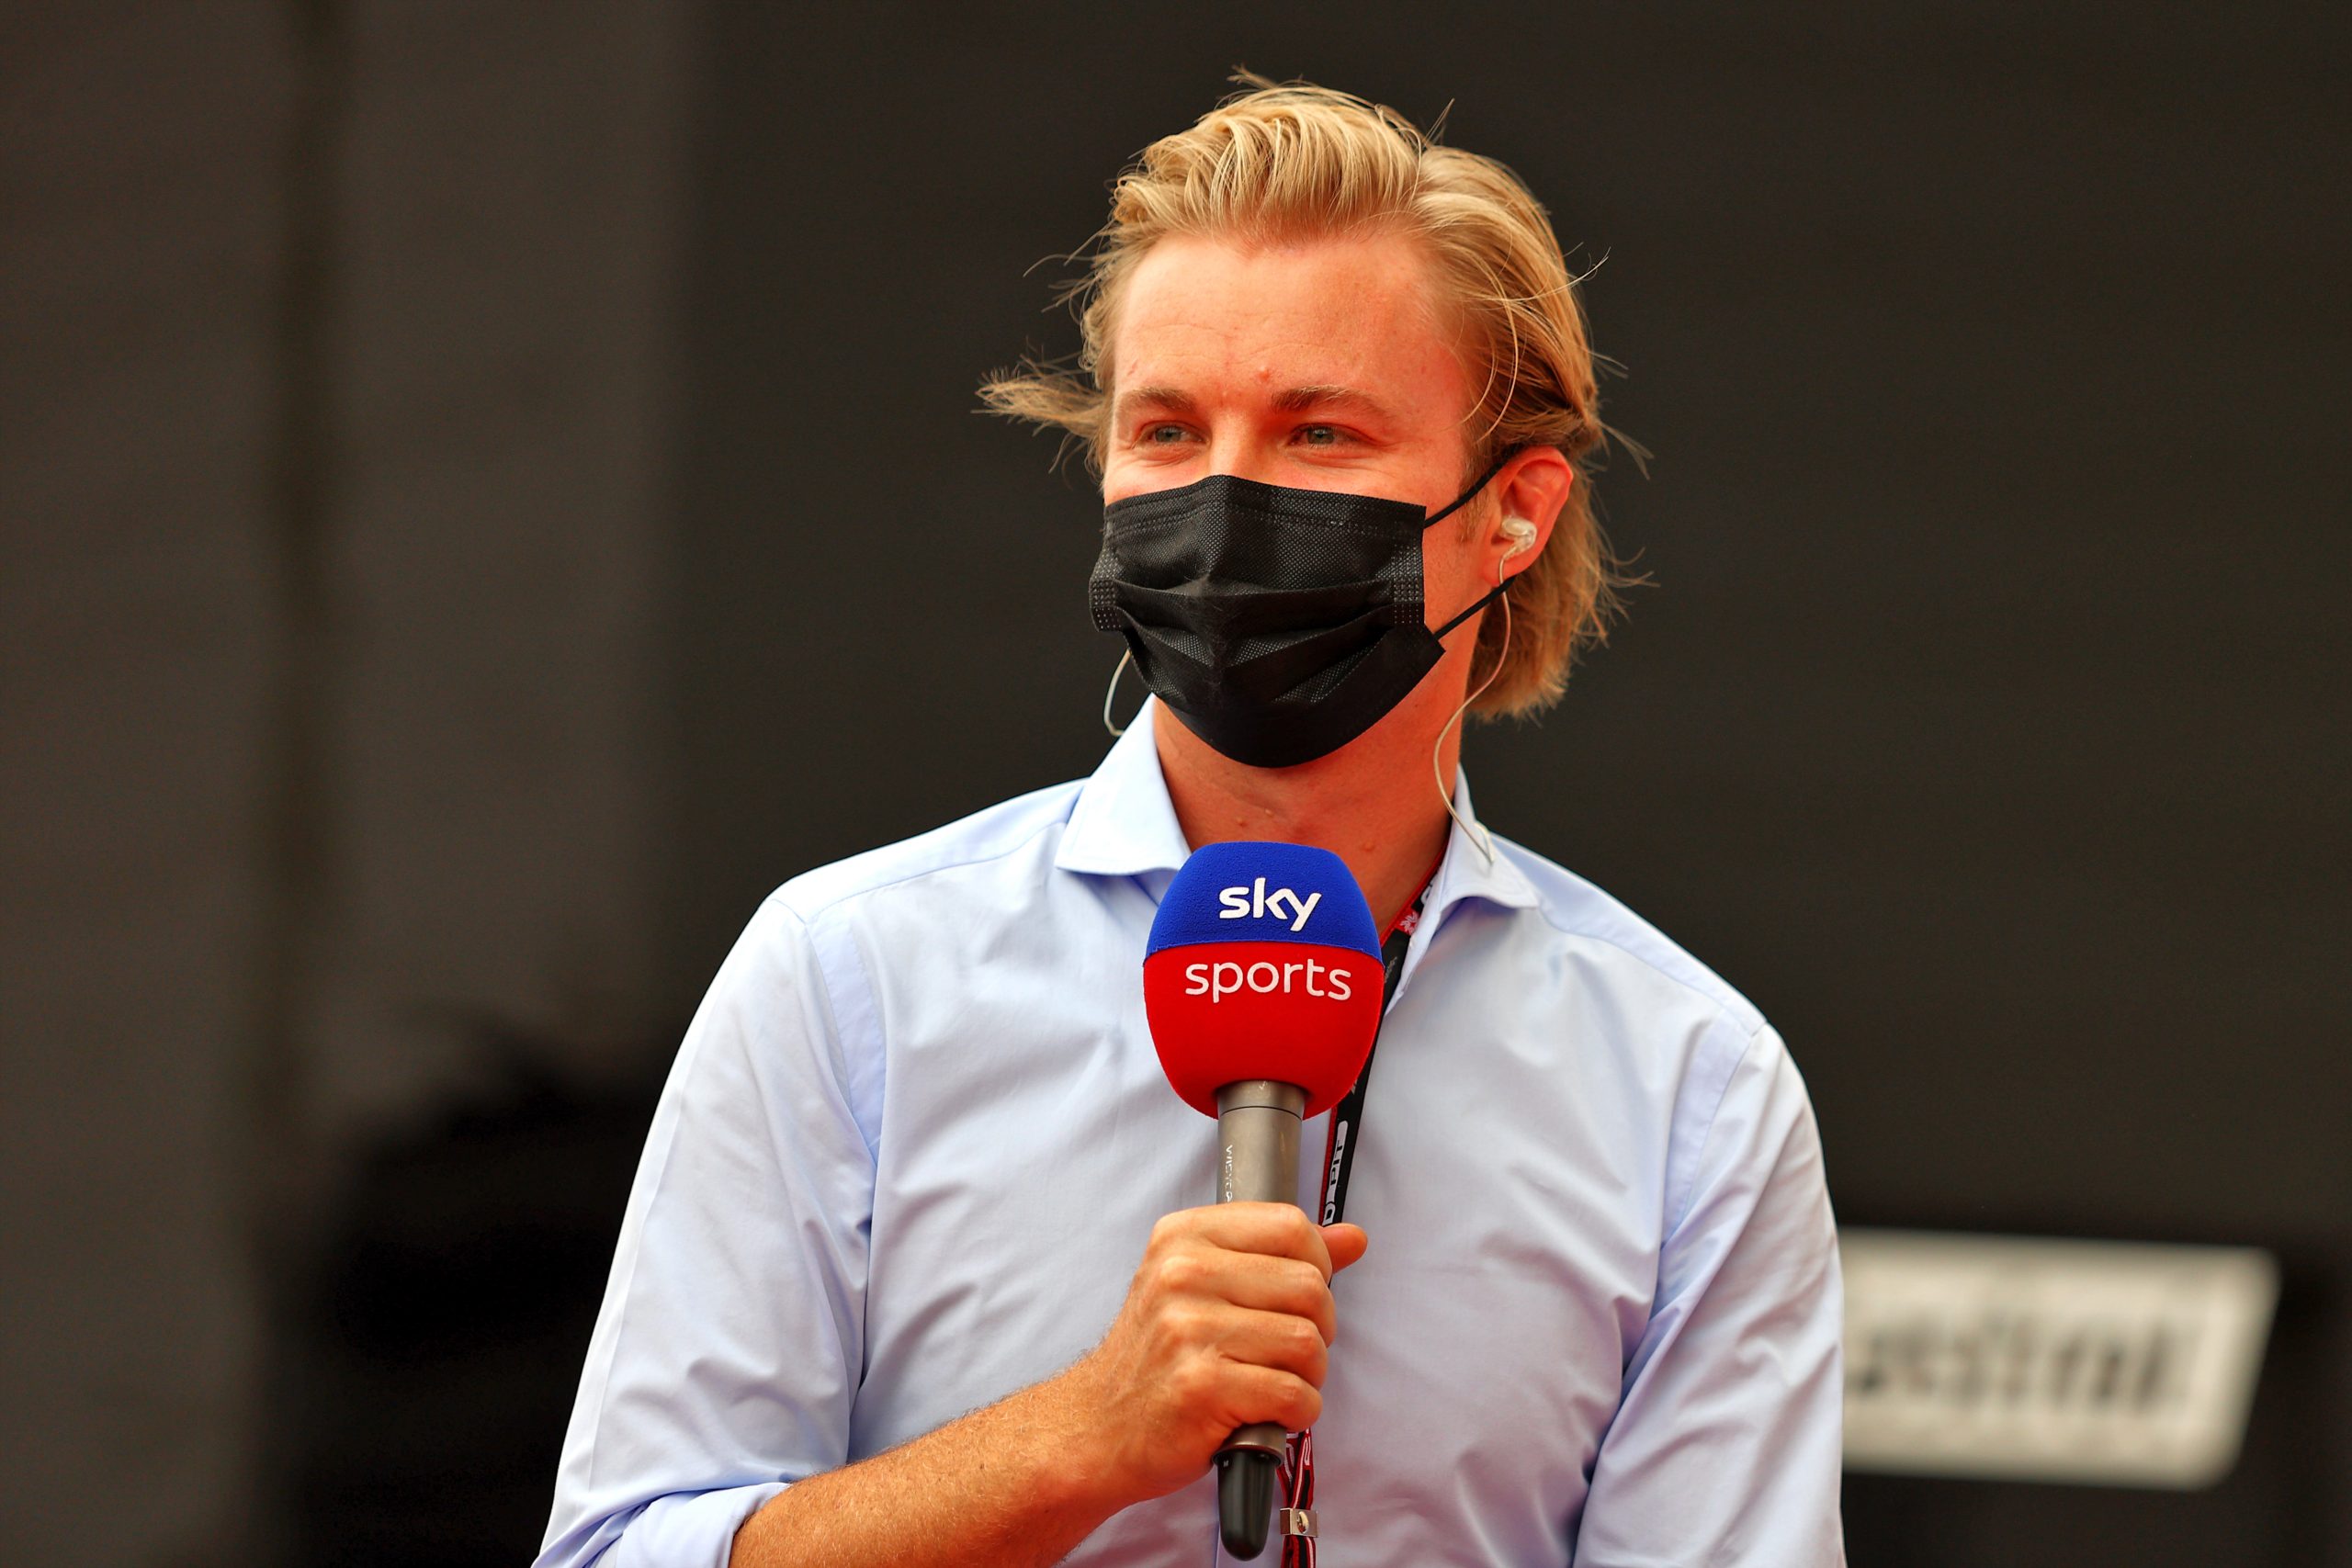 Heres Why Nico Rosberg Might Be Barred From The F1 Paddock